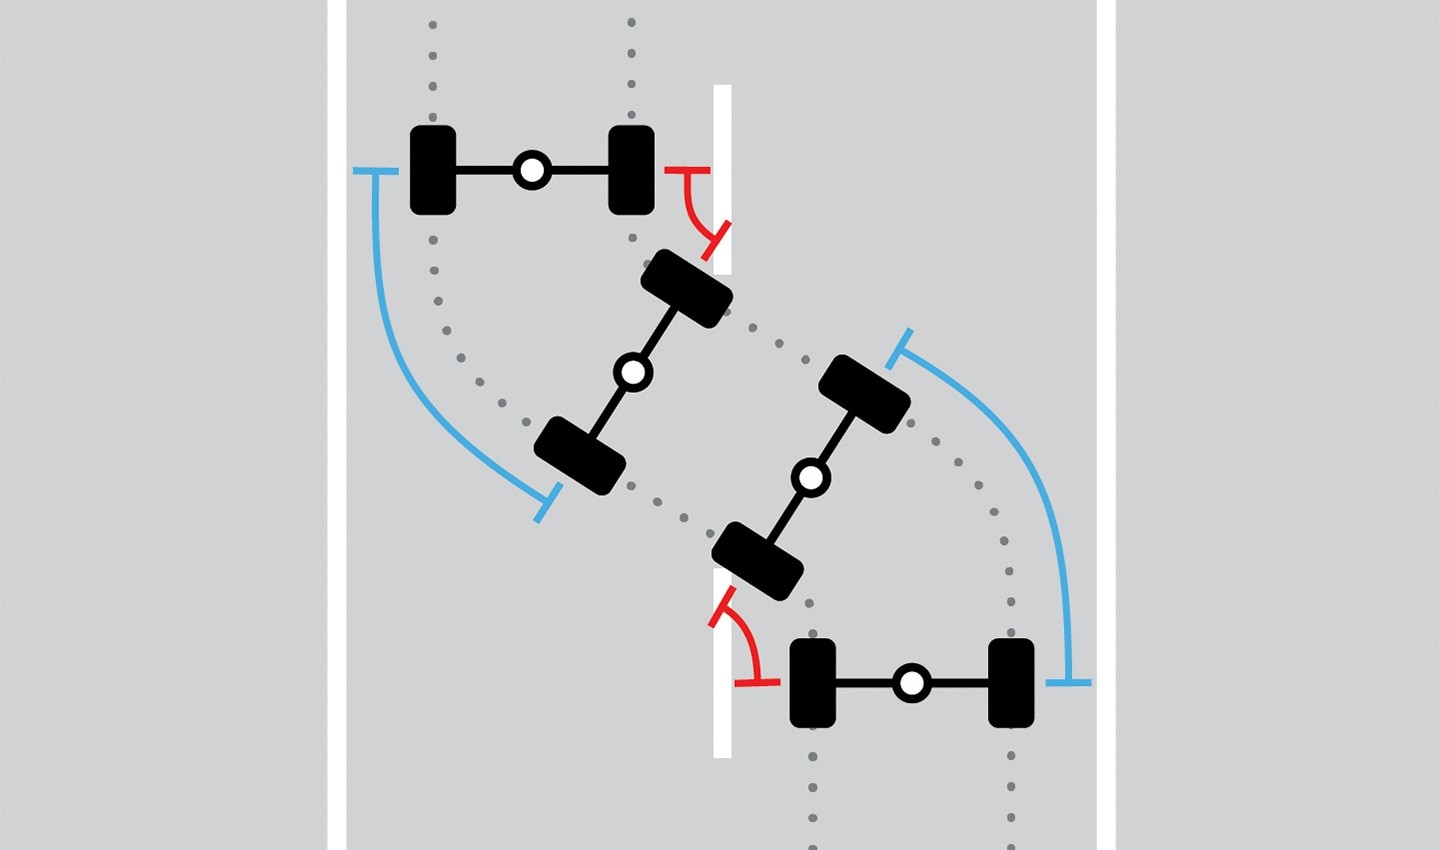 Image for illustrative purposes and is vastly simplified. When a vehicle changes direction, the wheel on the outside of the turn travels further (see the blue lines) than the wheels on the inside of the turn, see the red lines. Measuring these distances helps understand directional changes in a vehicle when a gyroscope isn’t present.